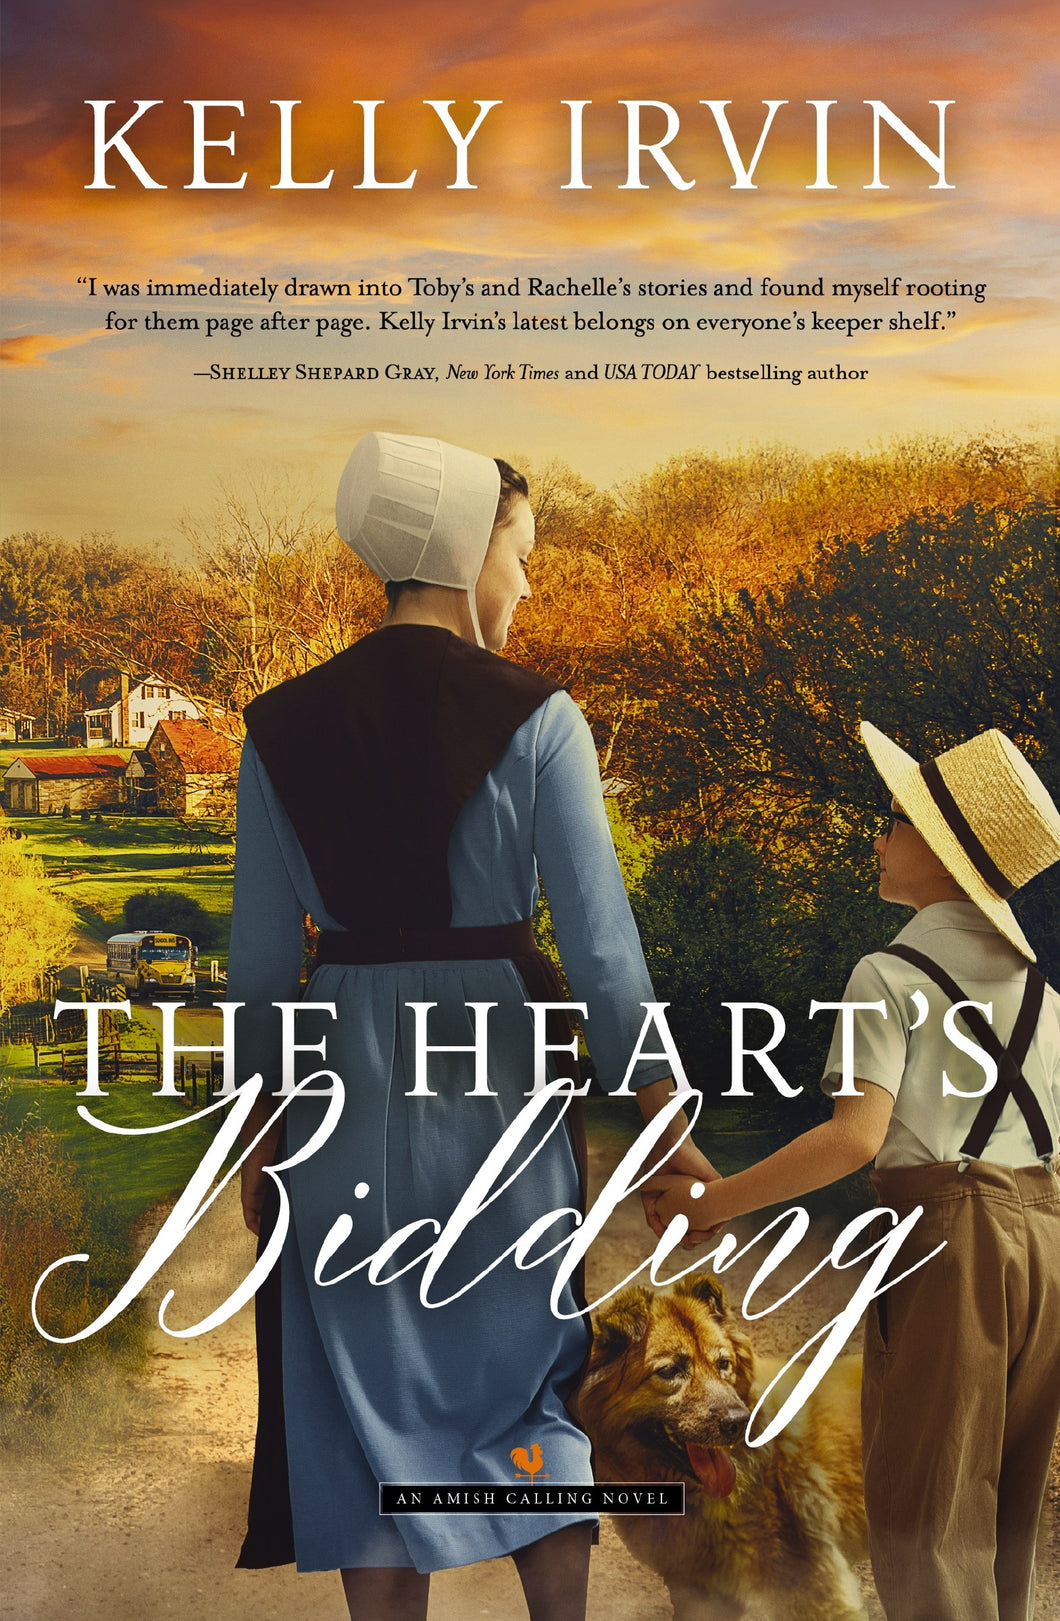 The Heart's Bidding (Amish Calling)